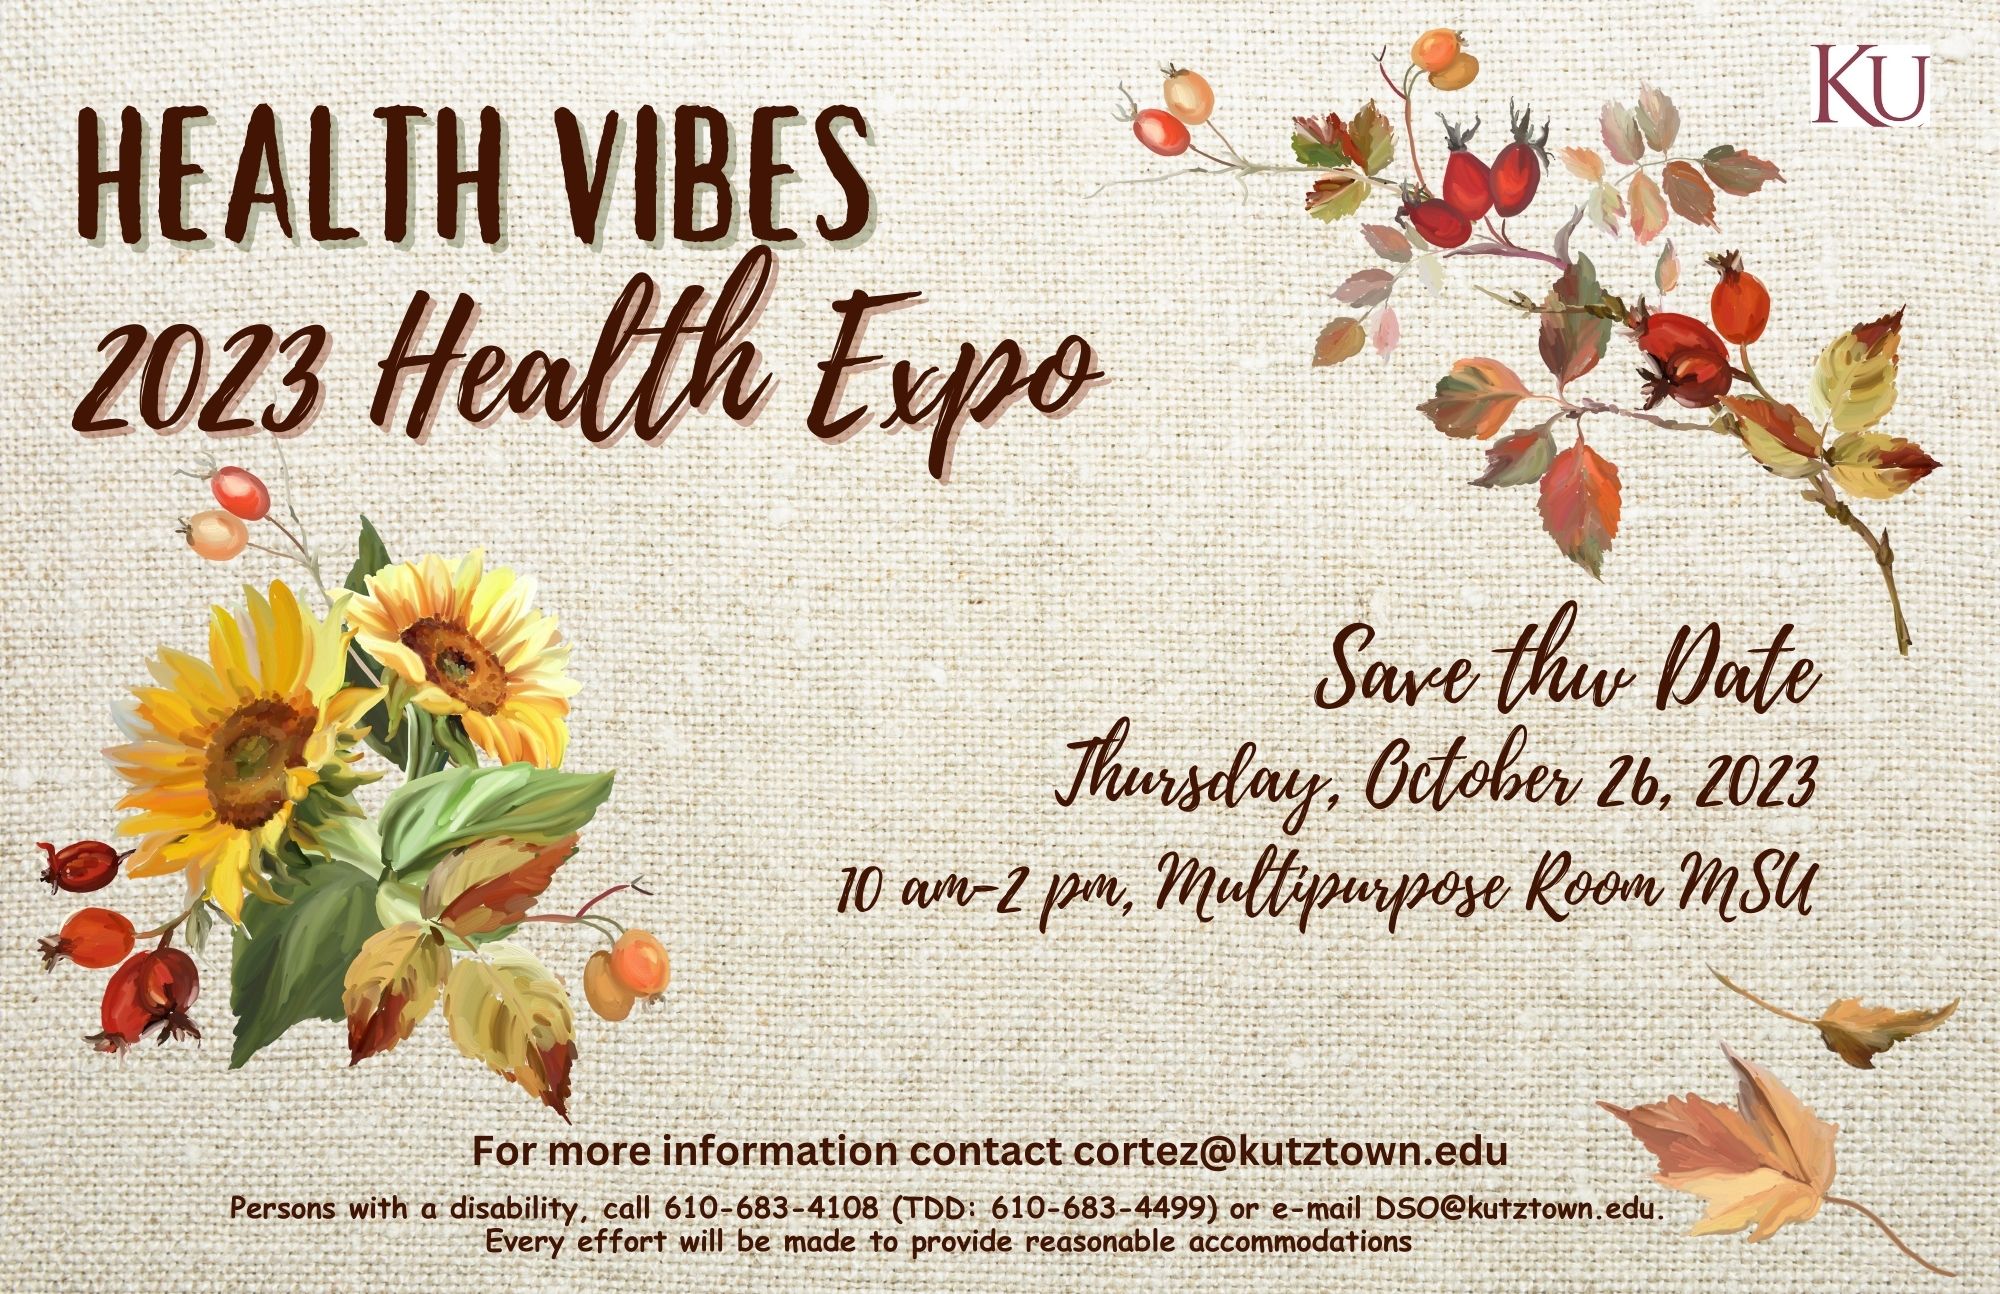 A image with flowers on it and the words advertising a Health Expo